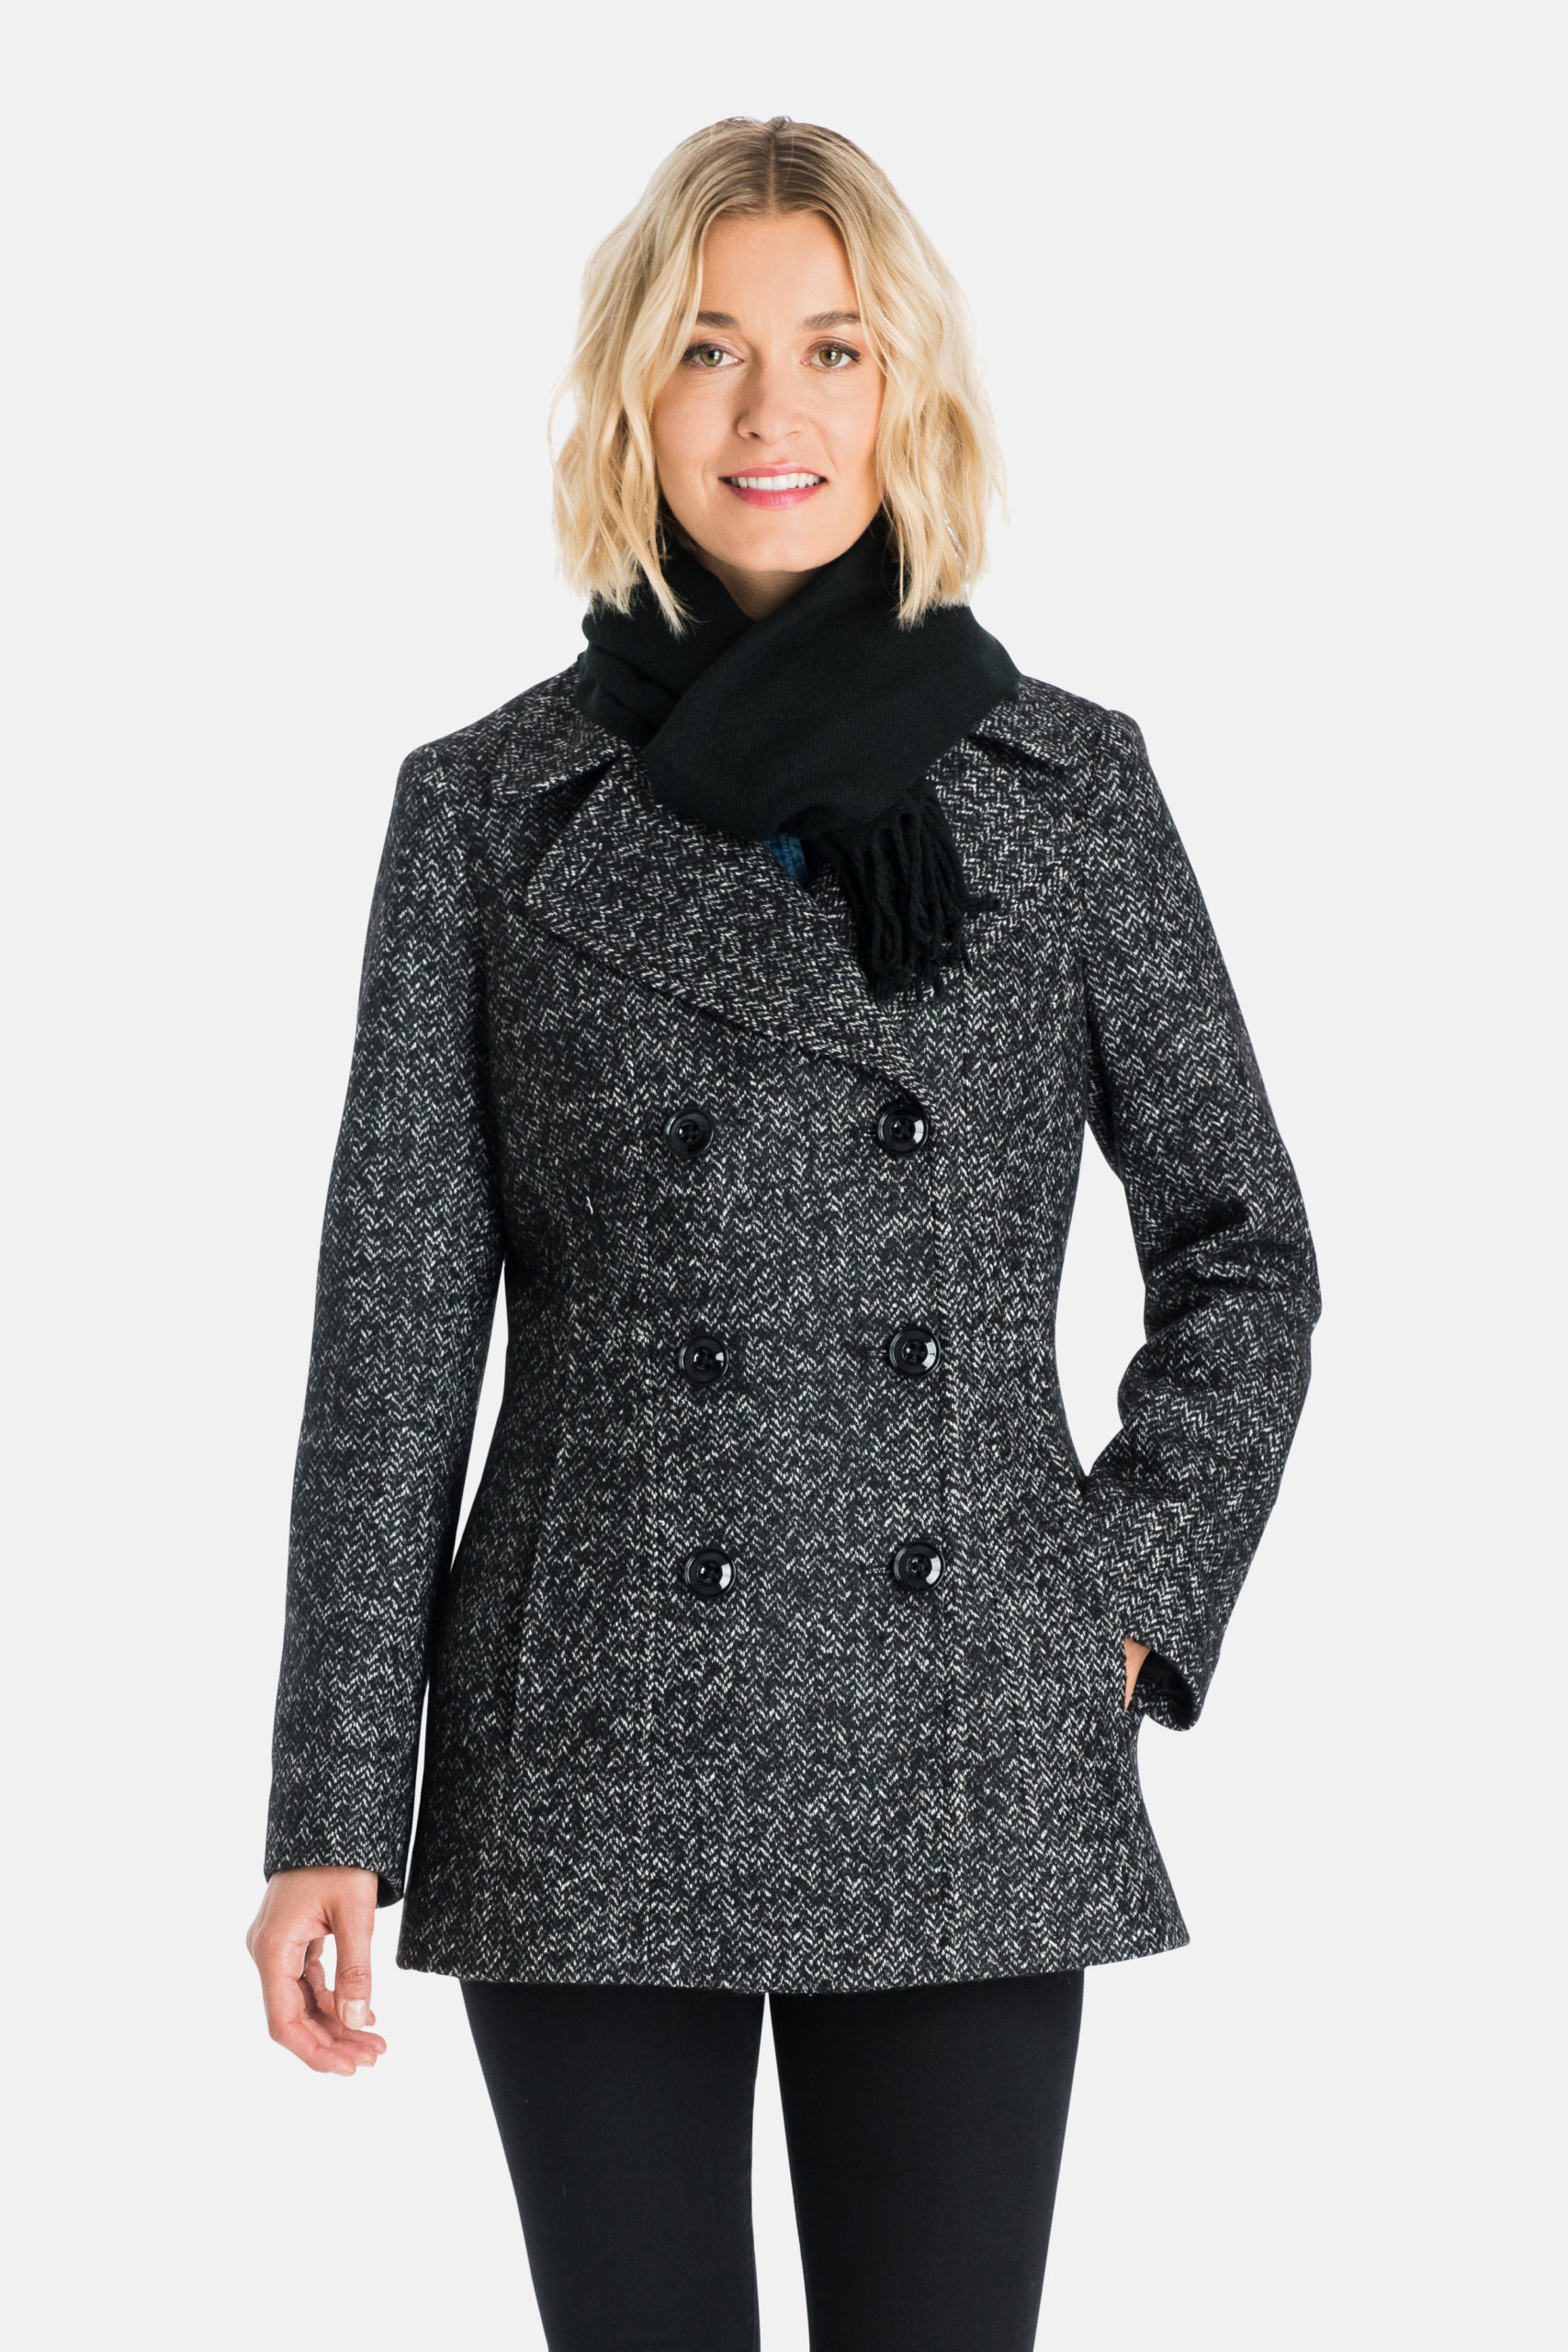 10 Best Winter Jackets and Coats for Women - Luggage Armory